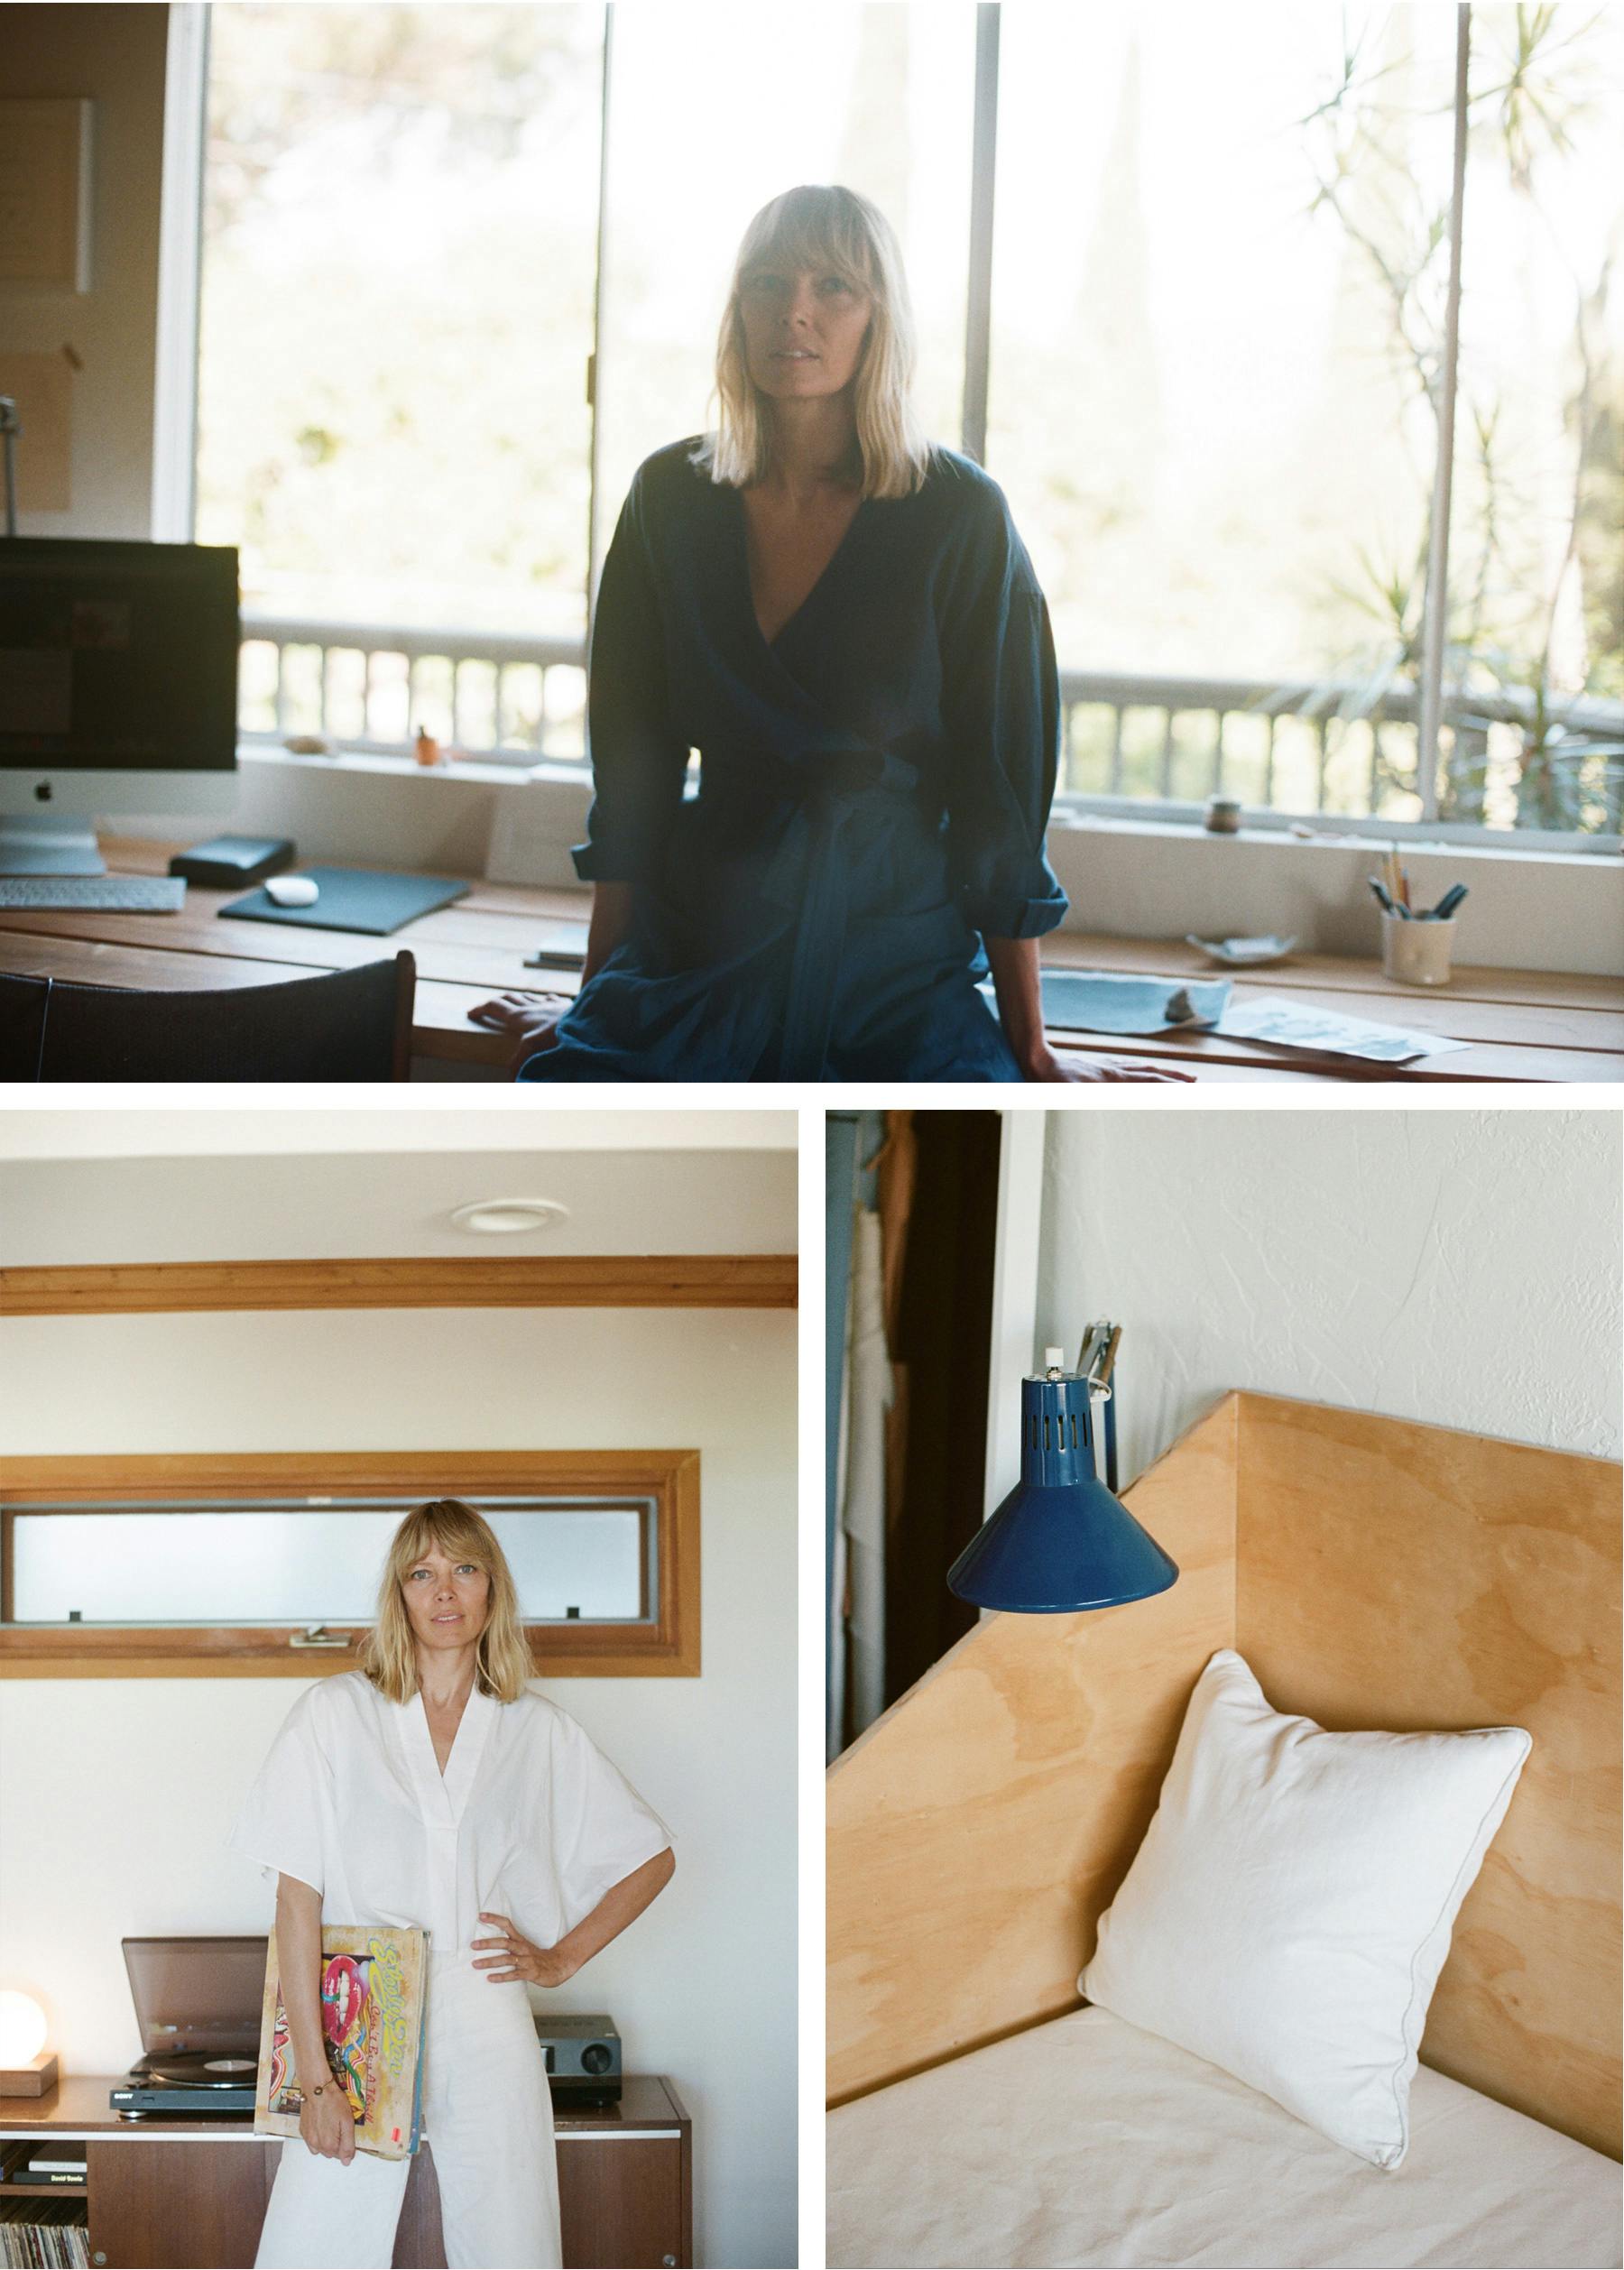 Three images. In the first, Jesse Kamm is wearing dark colors and standing in front of a window. In the second, Jesse Kamm is wearing all white and standing with her hand on her hip. The third image is of light colored pillows.